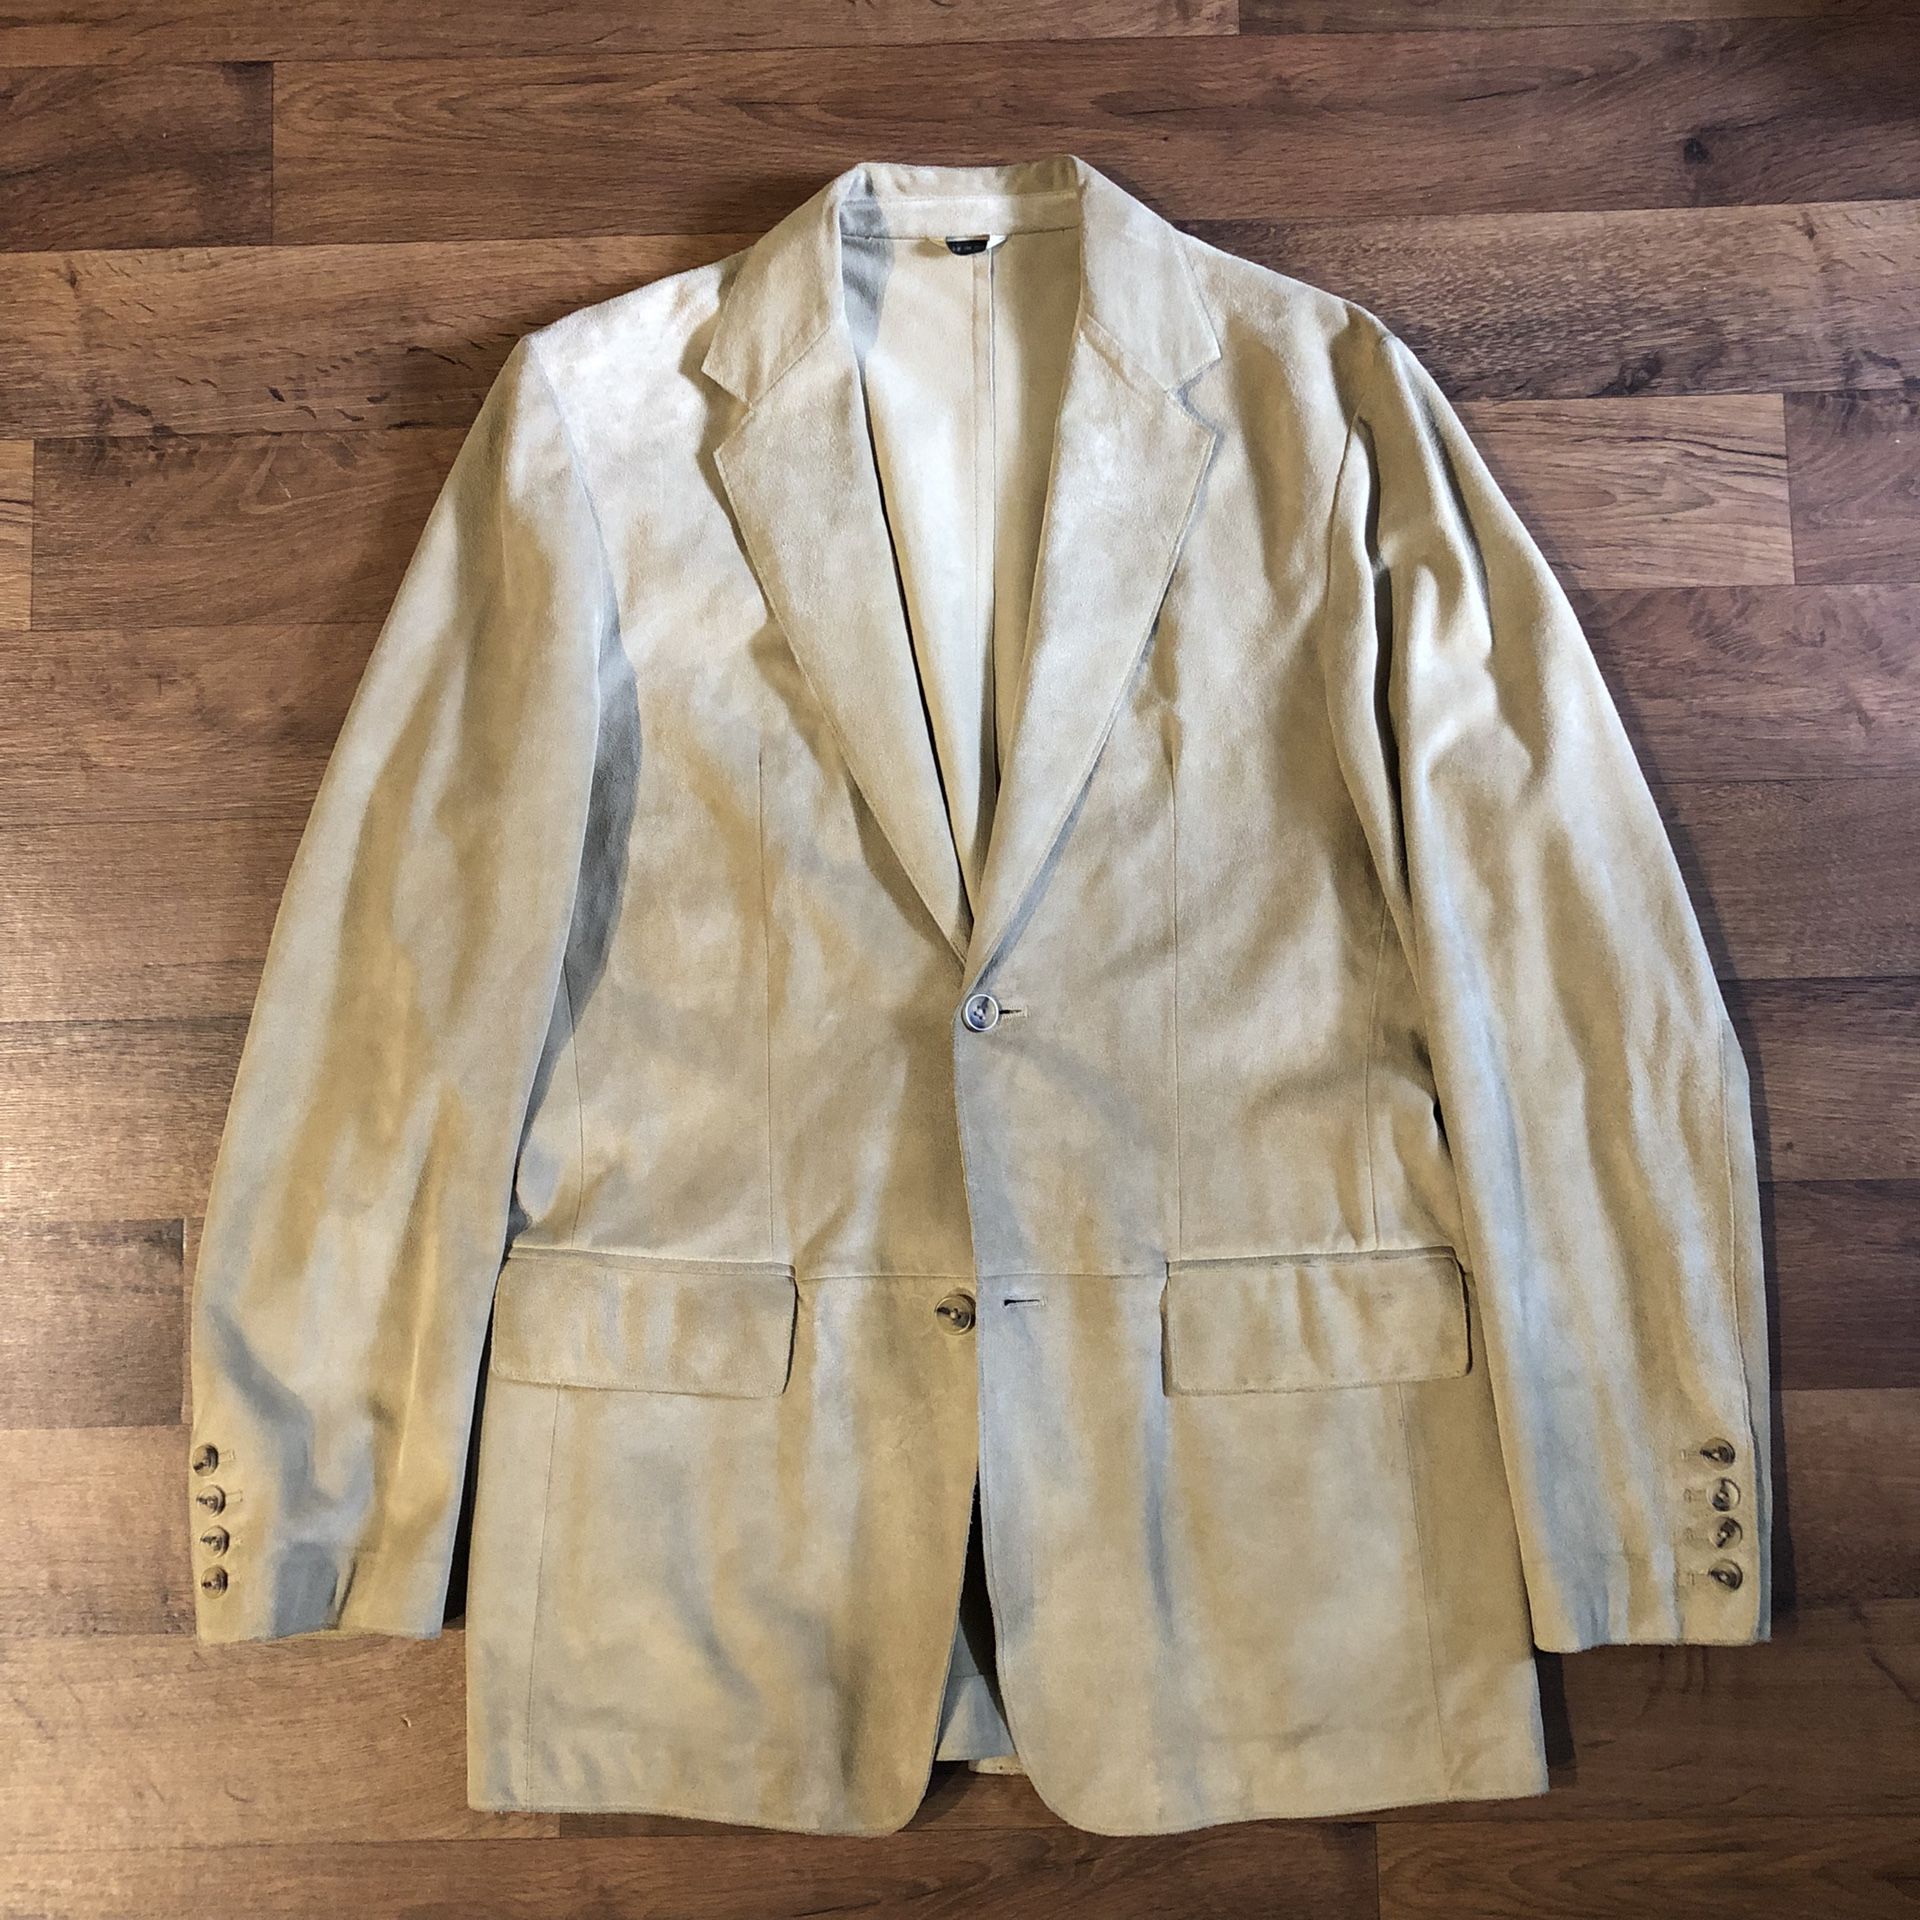 banana republic blazer jacket mens size 38r leather suede single vent.  . good used condition 